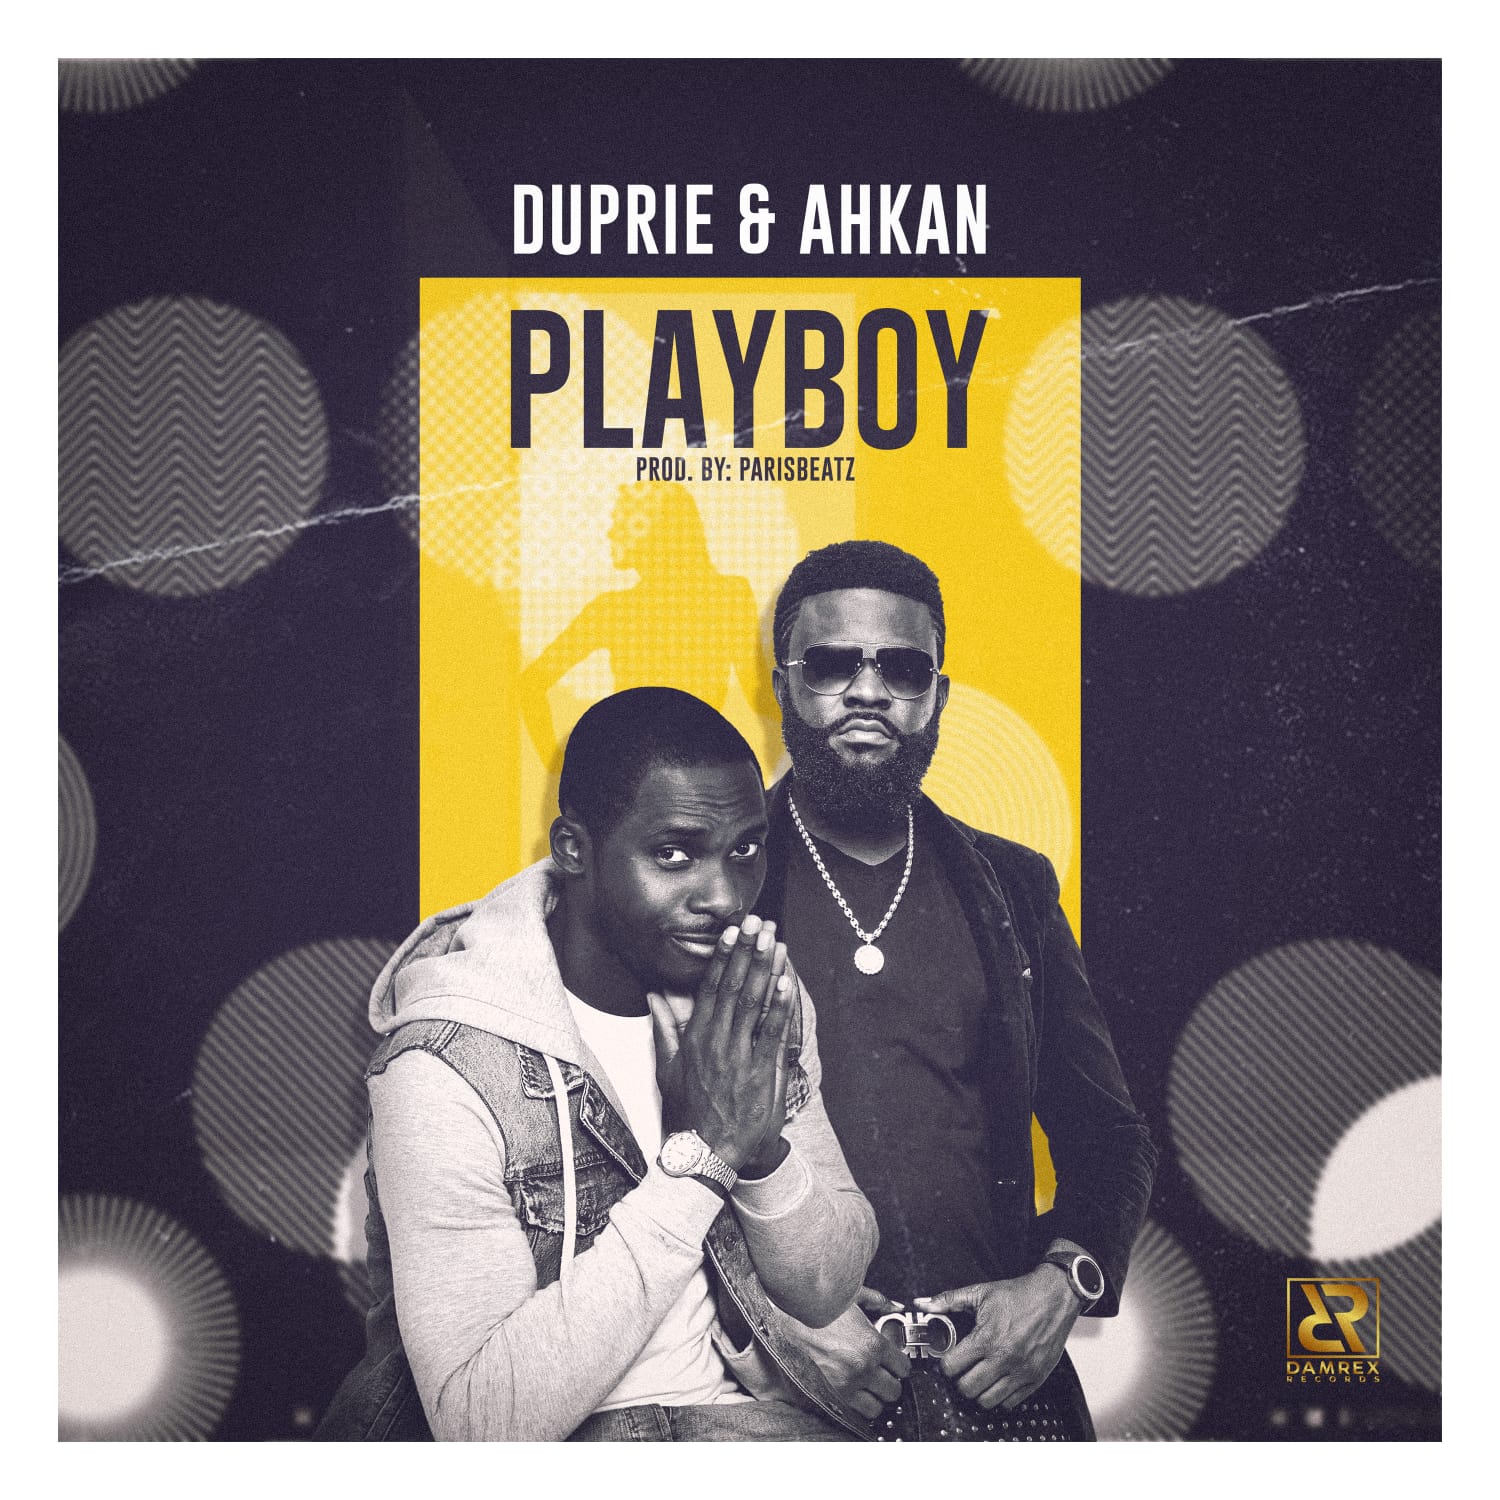 uprie links up with Ahkan